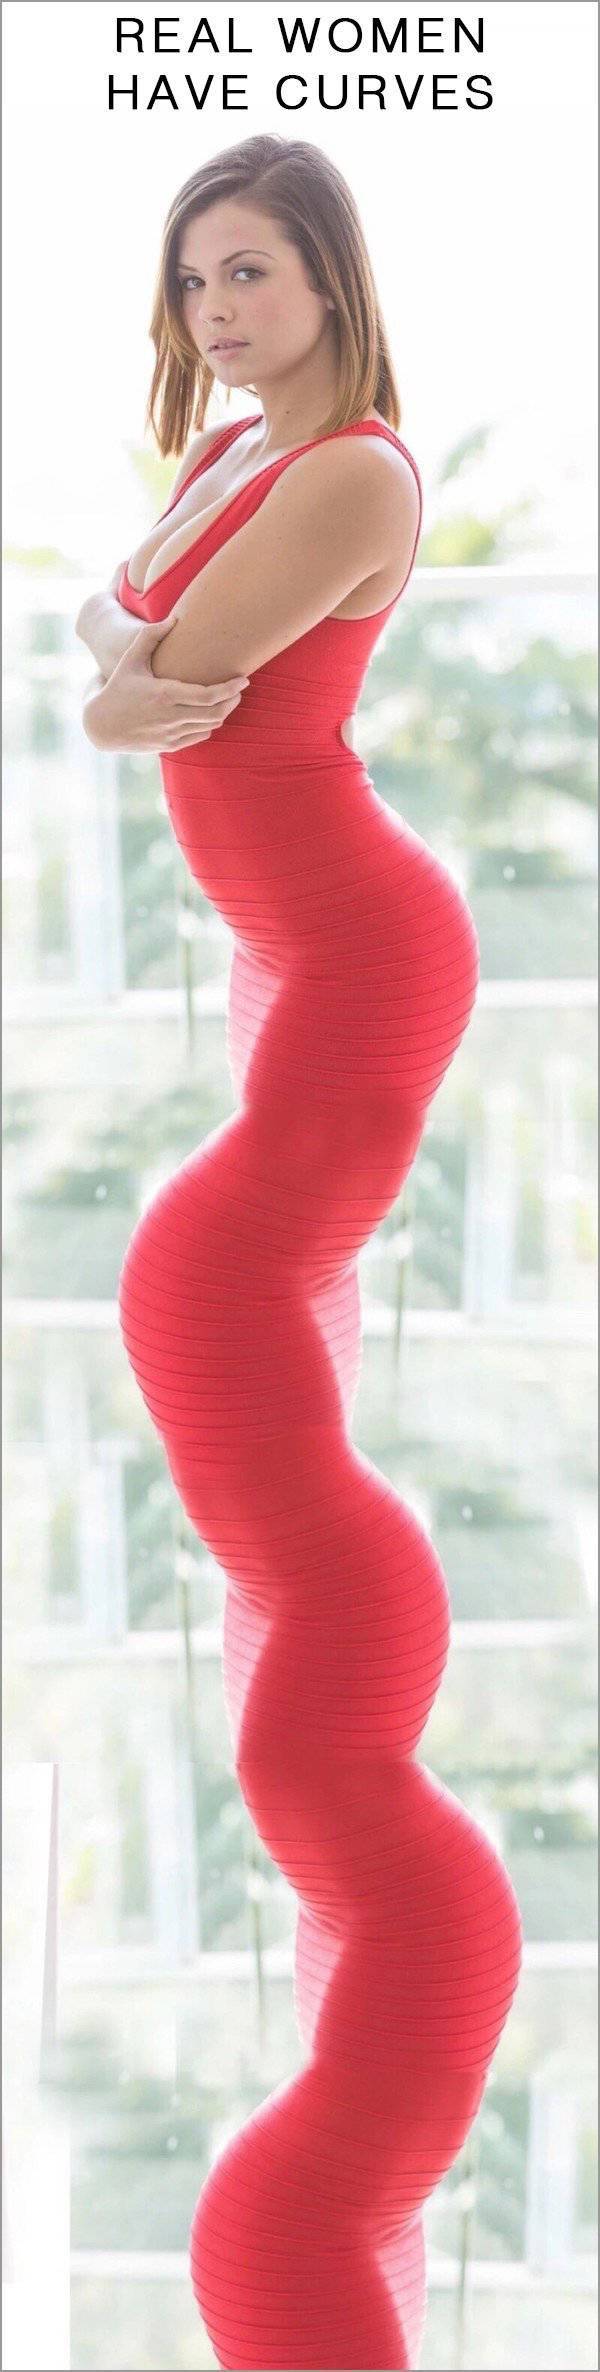 curviest girl ever - Real Women Have Curves